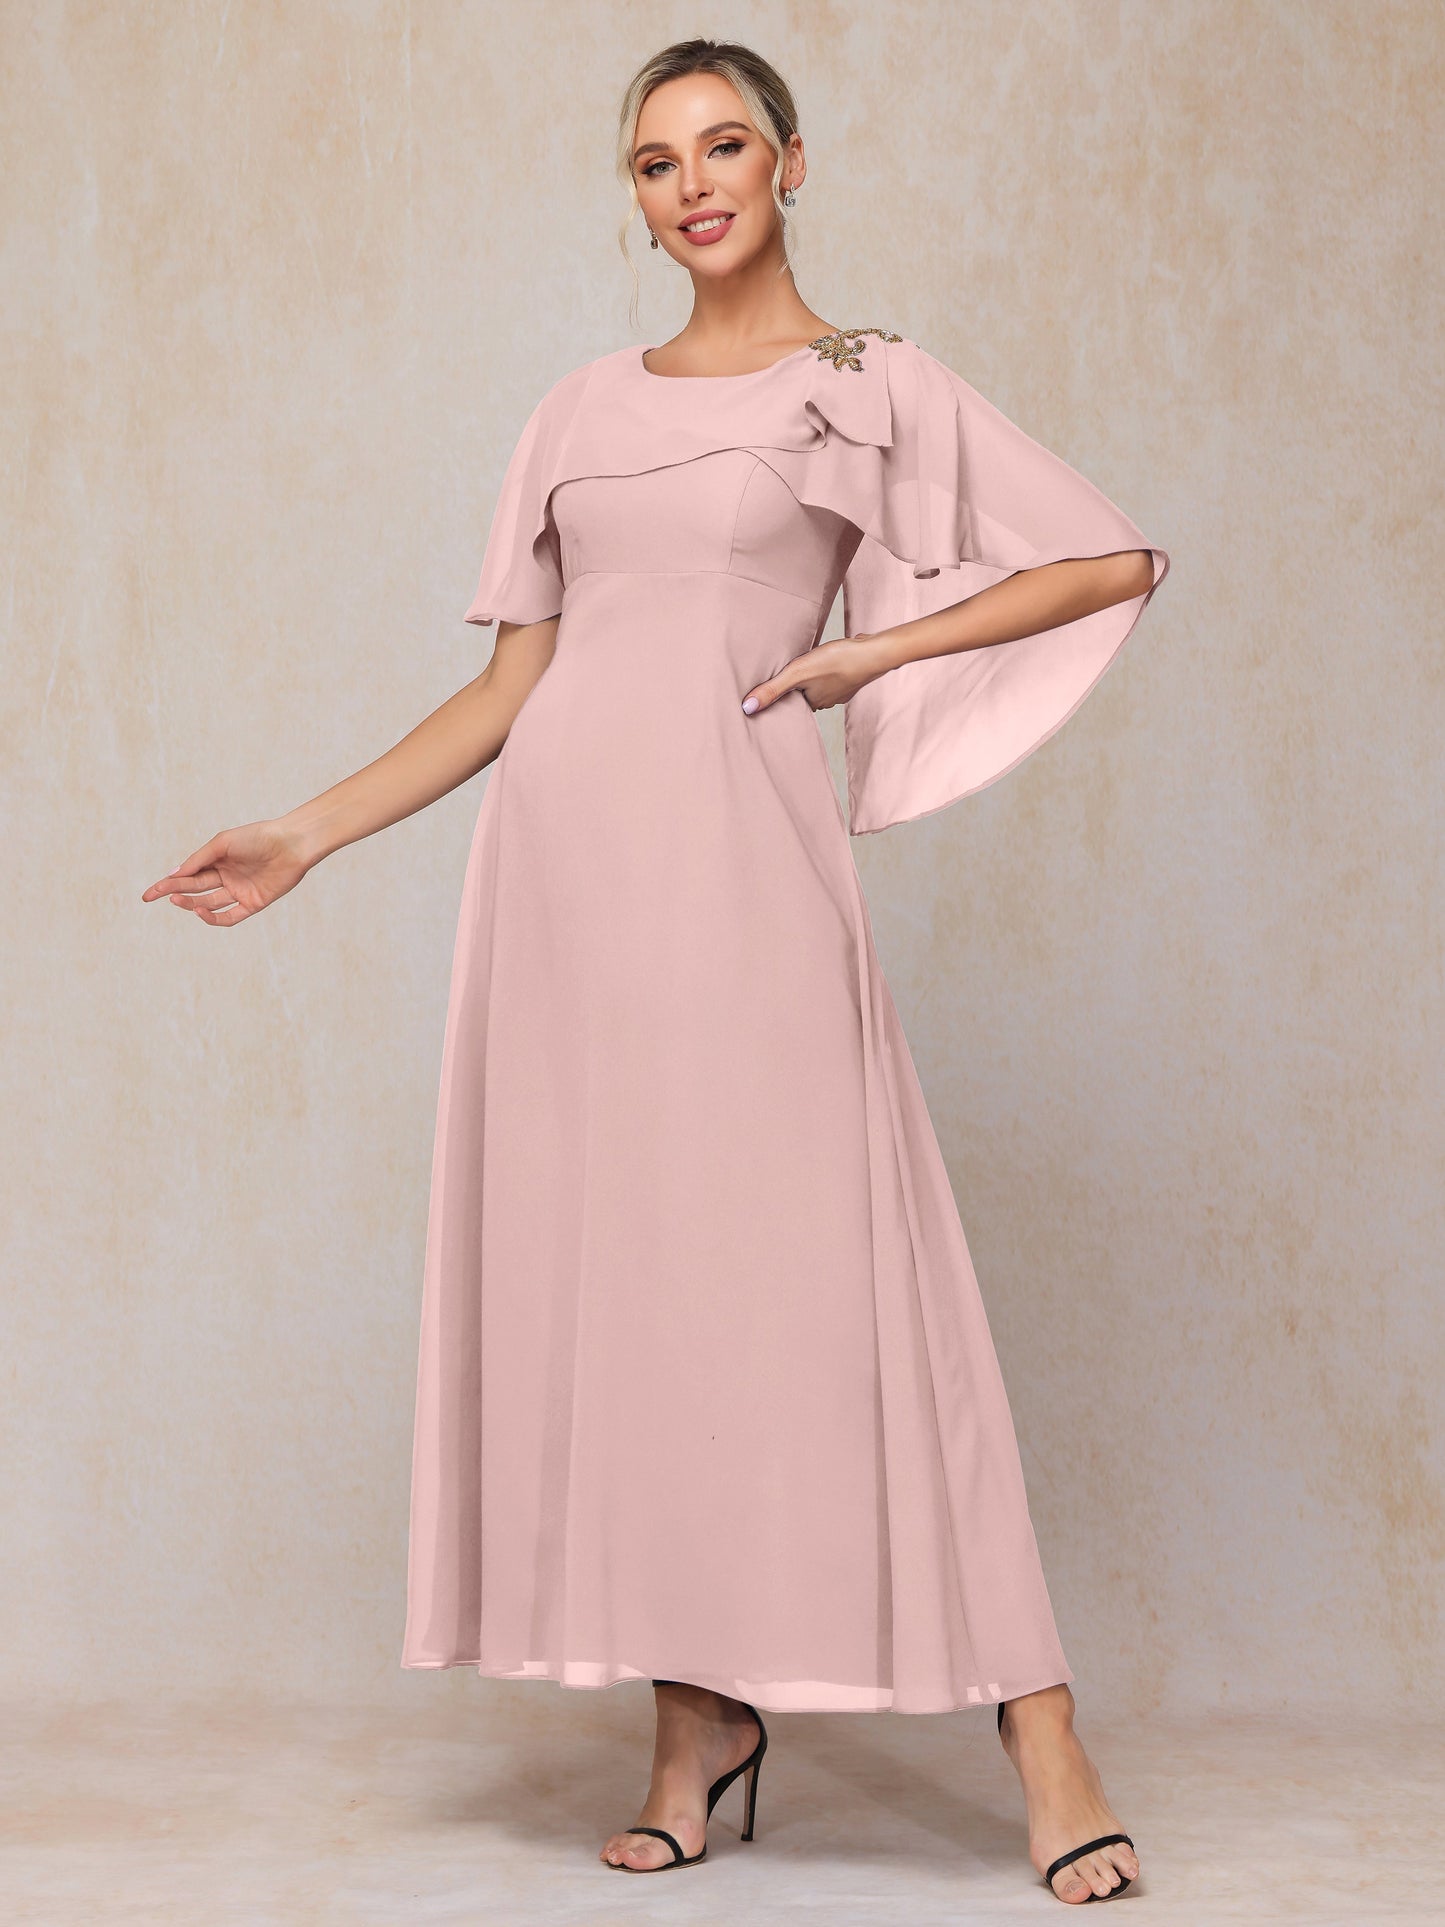 Formal Short Sleeves Ankle Length Chiffon Wedding Guest Dresses